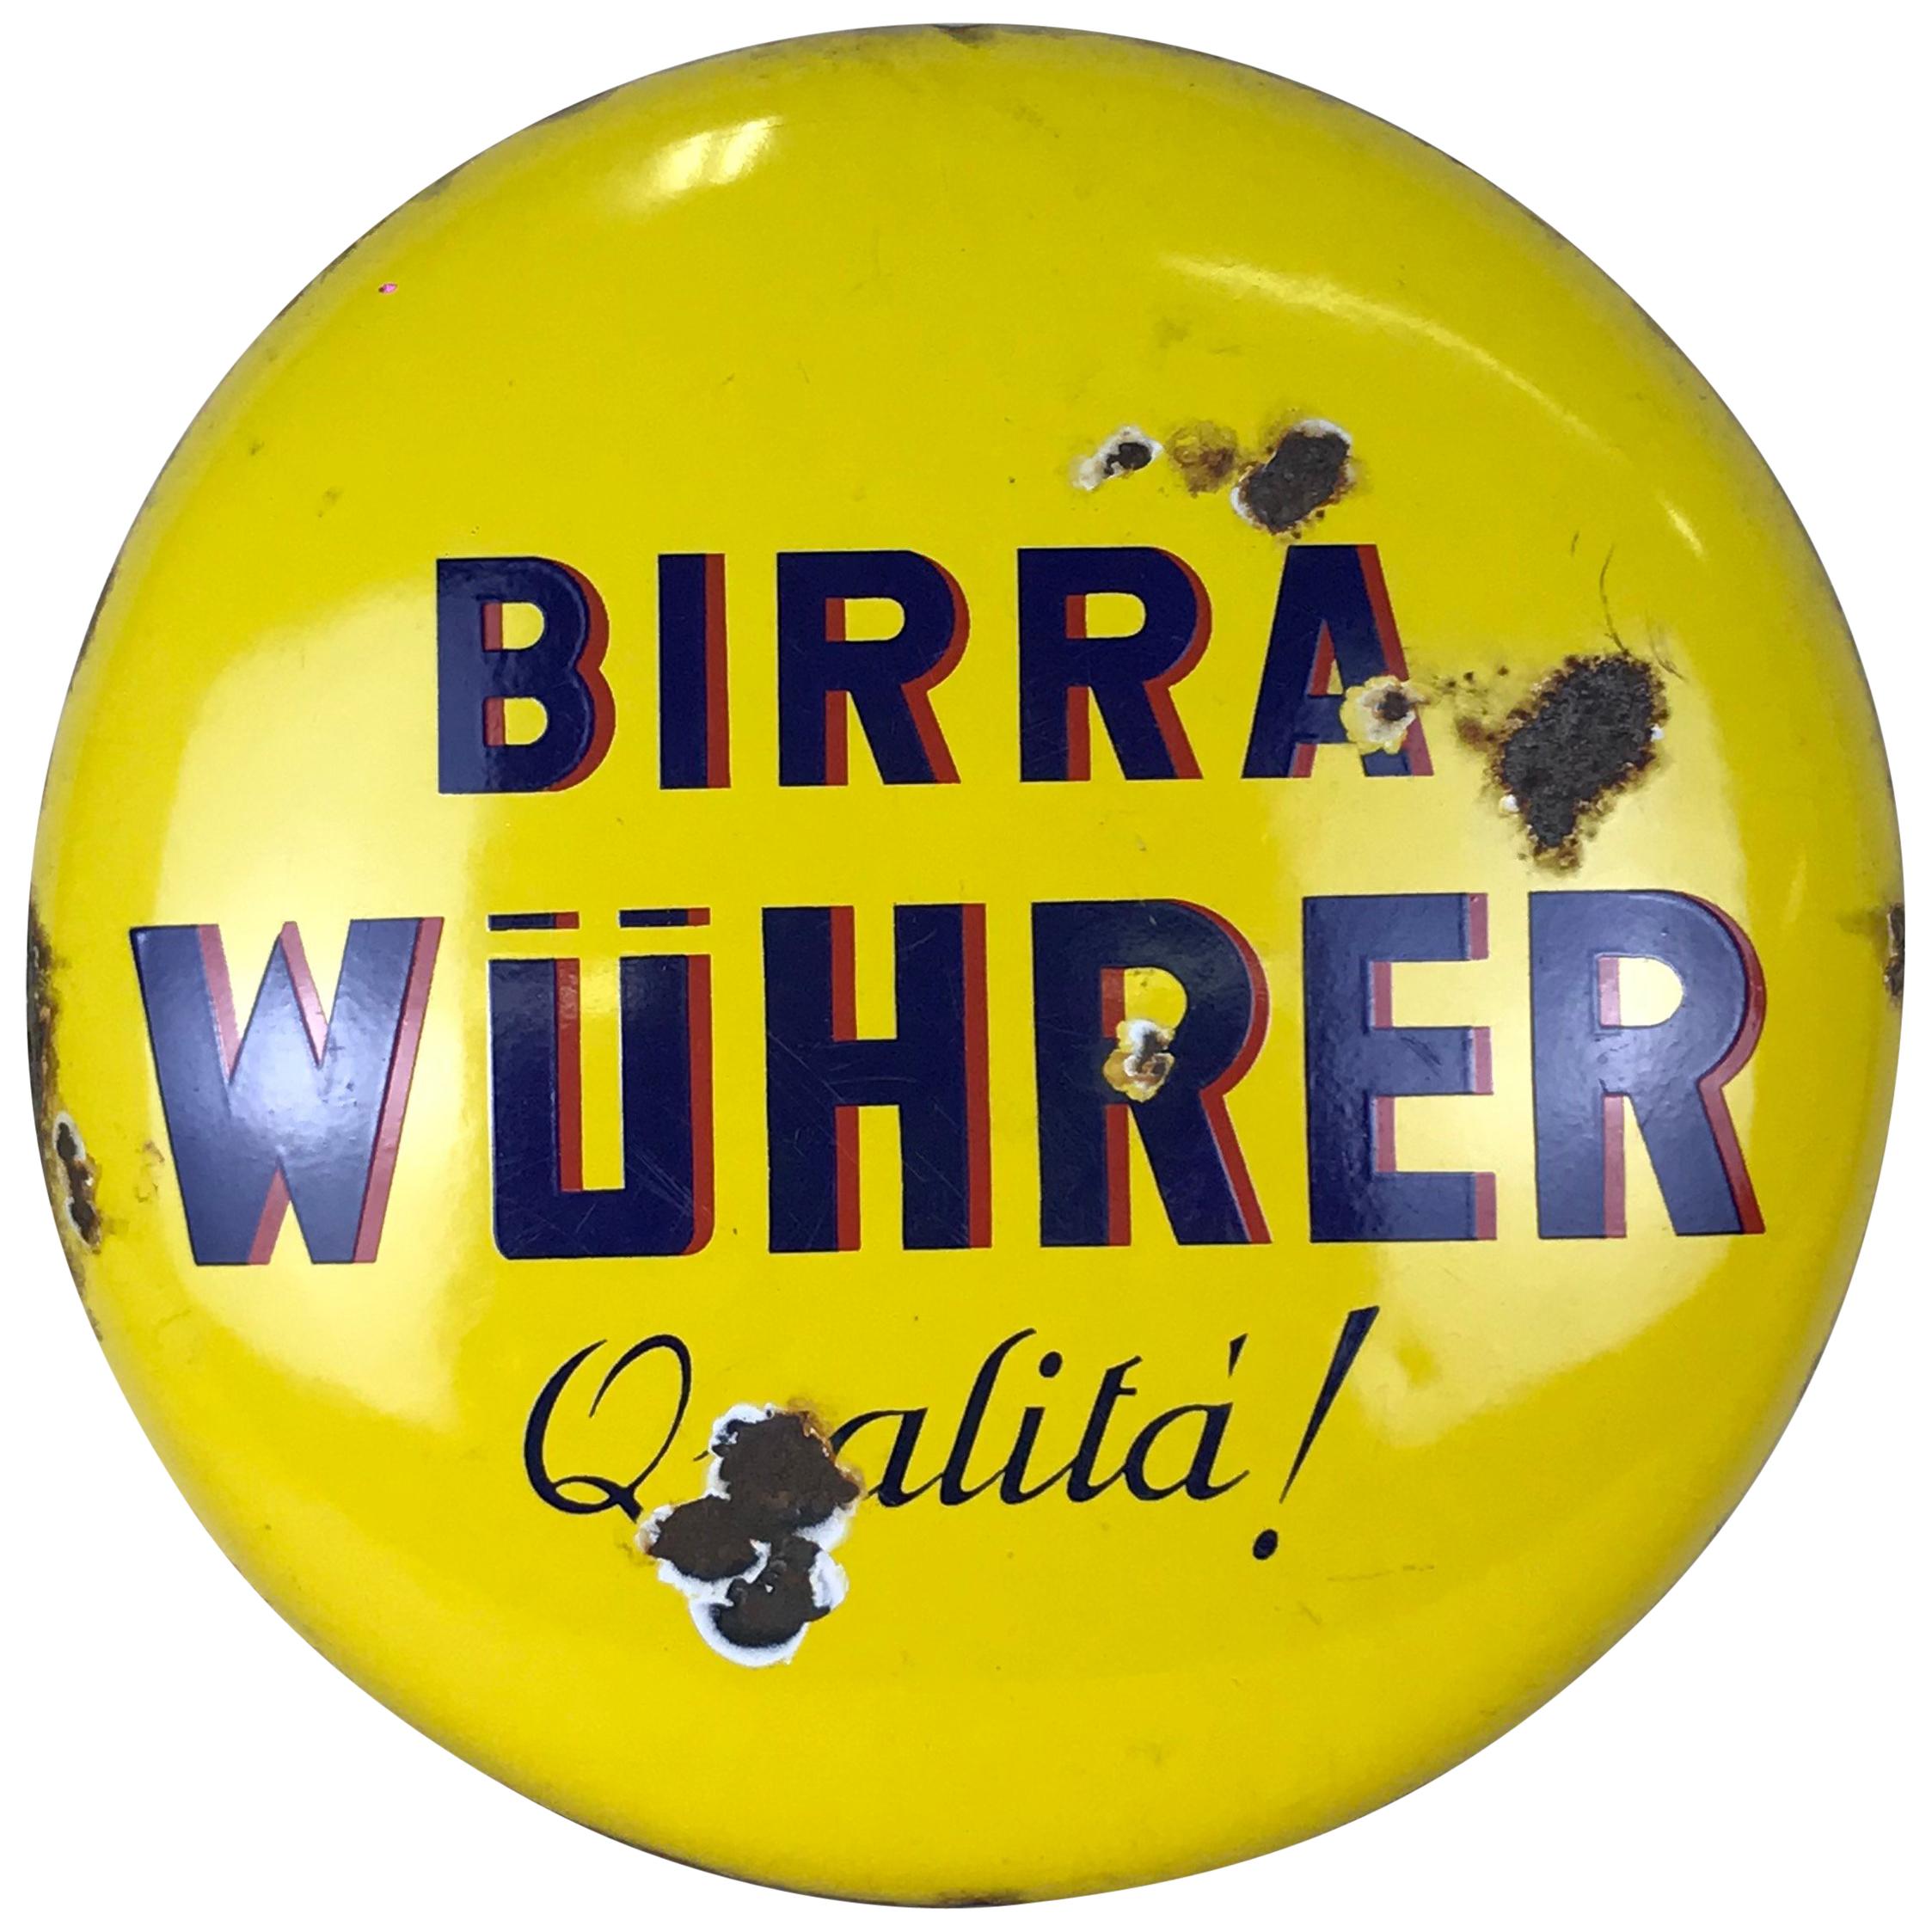 1960s Rare Vintage Yellow Wührer Beer Button Sign Made in Italy im Angebot